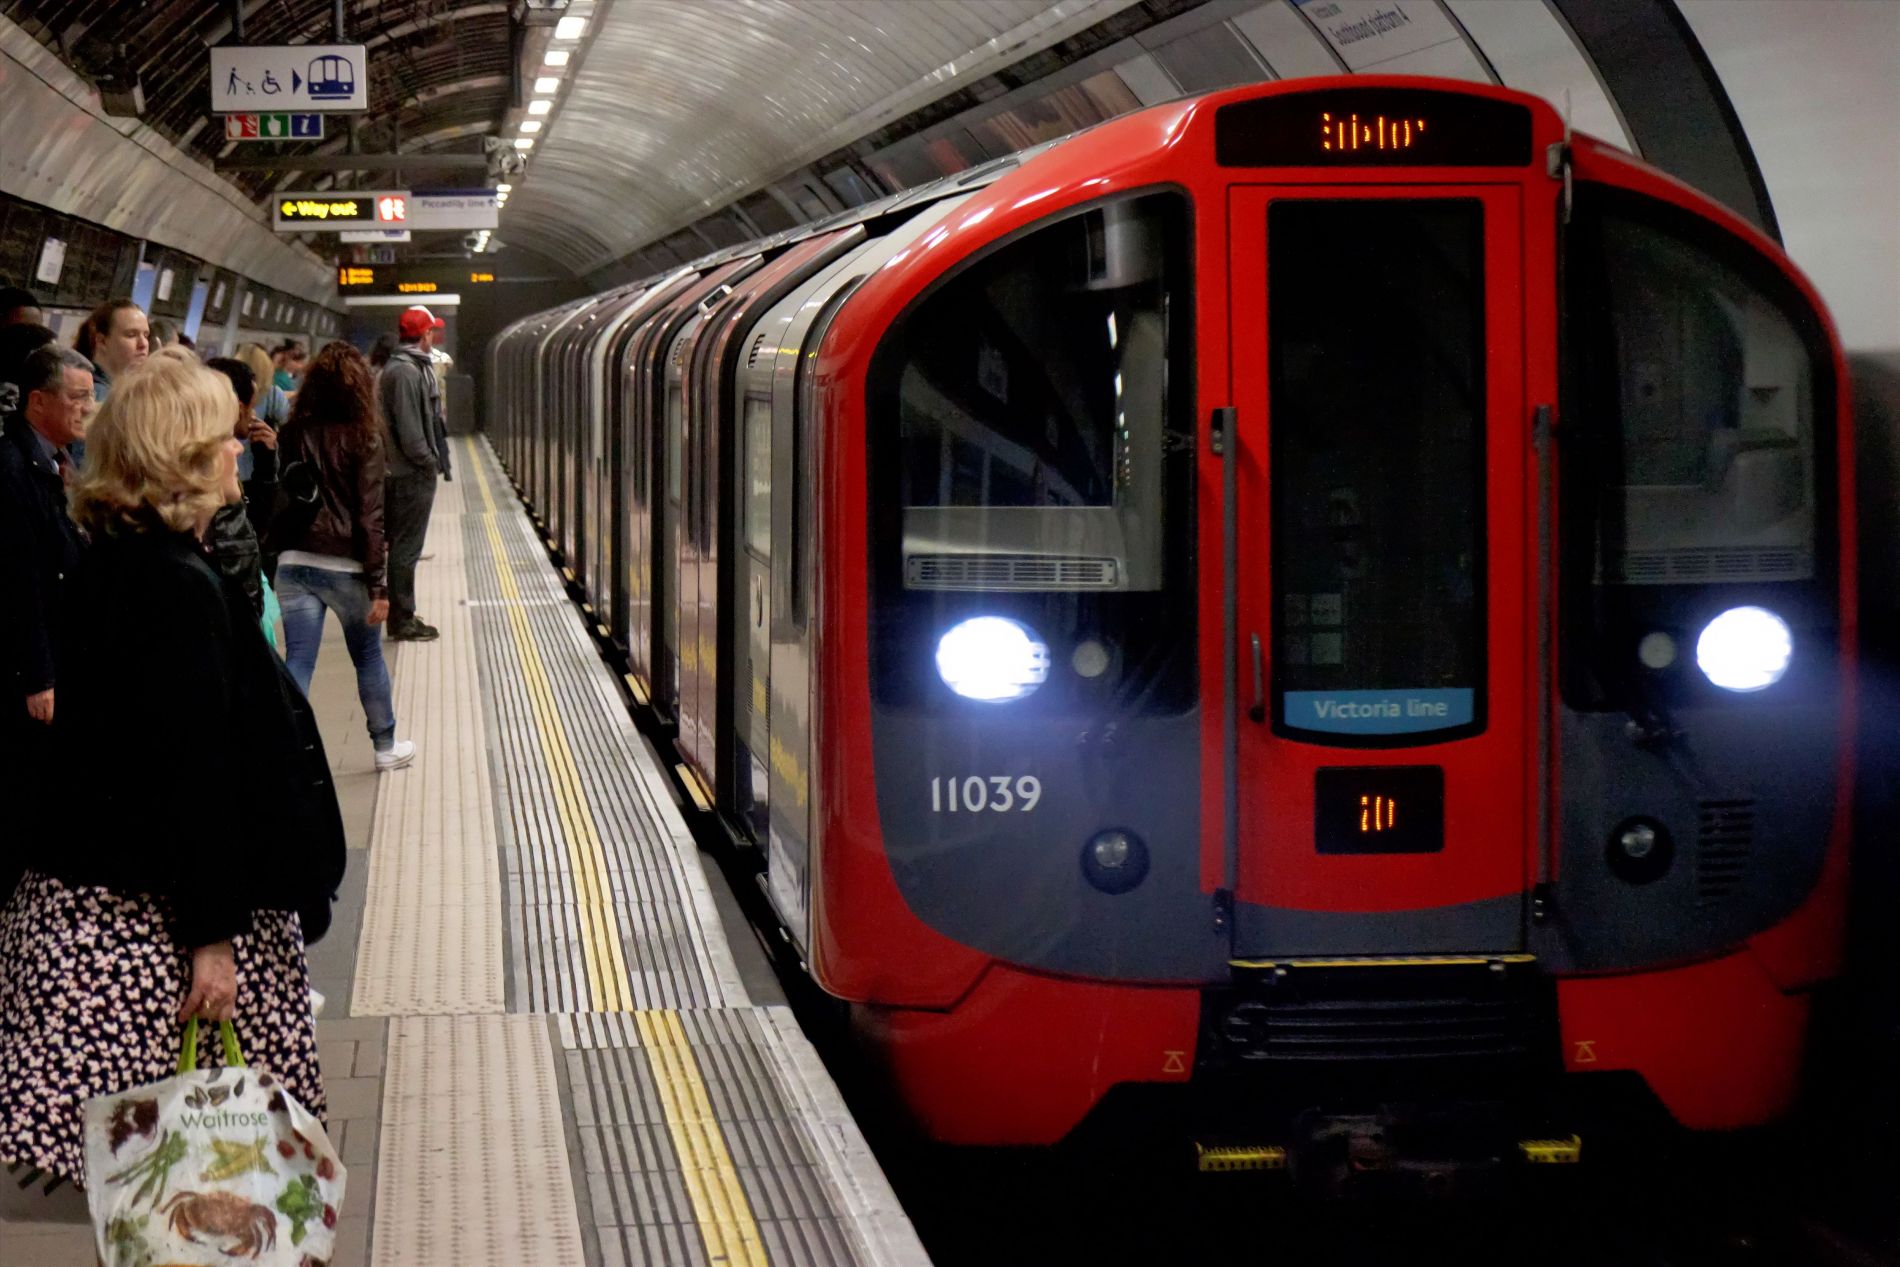 London Underground by Tom Page via Wikimedia Commons